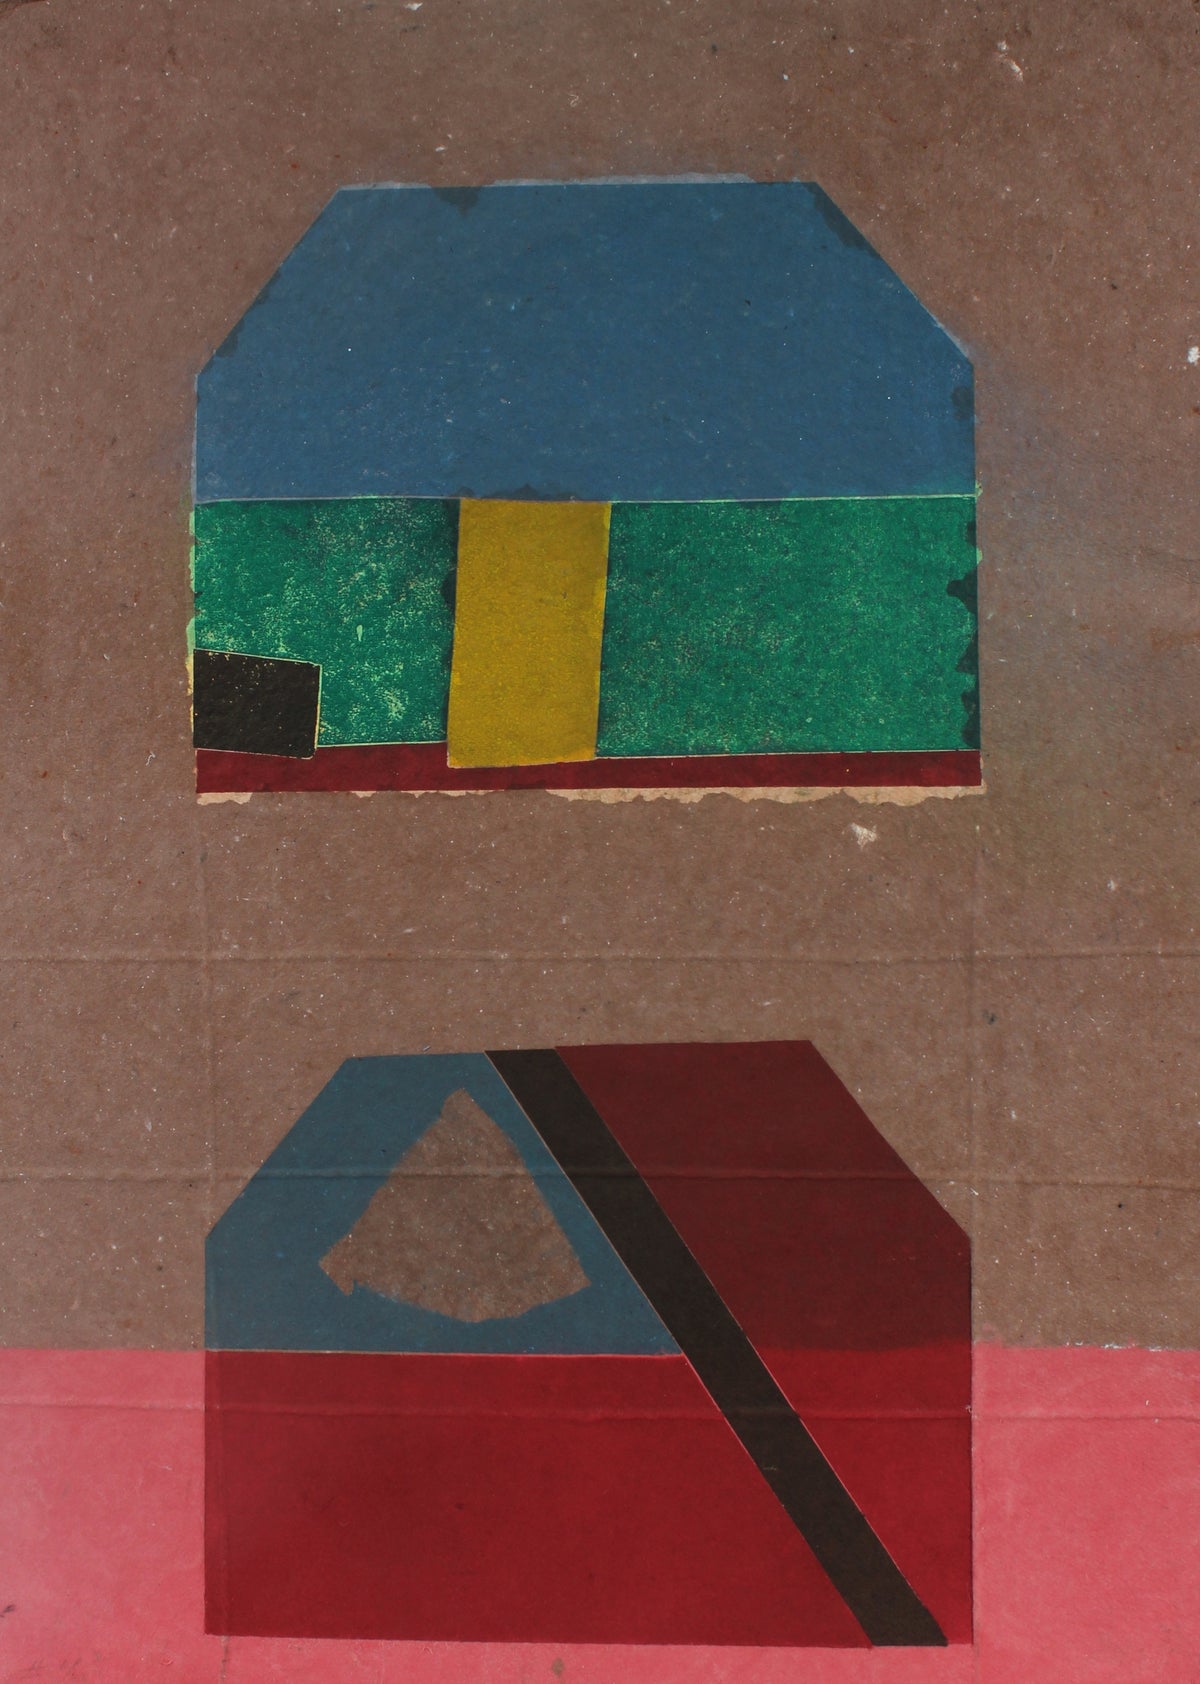 Abstracted Image of a House &lt;br&gt;1984-1988 Collograph on Handmade Paper with String &lt;br&gt;&lt;br&gt;#93467